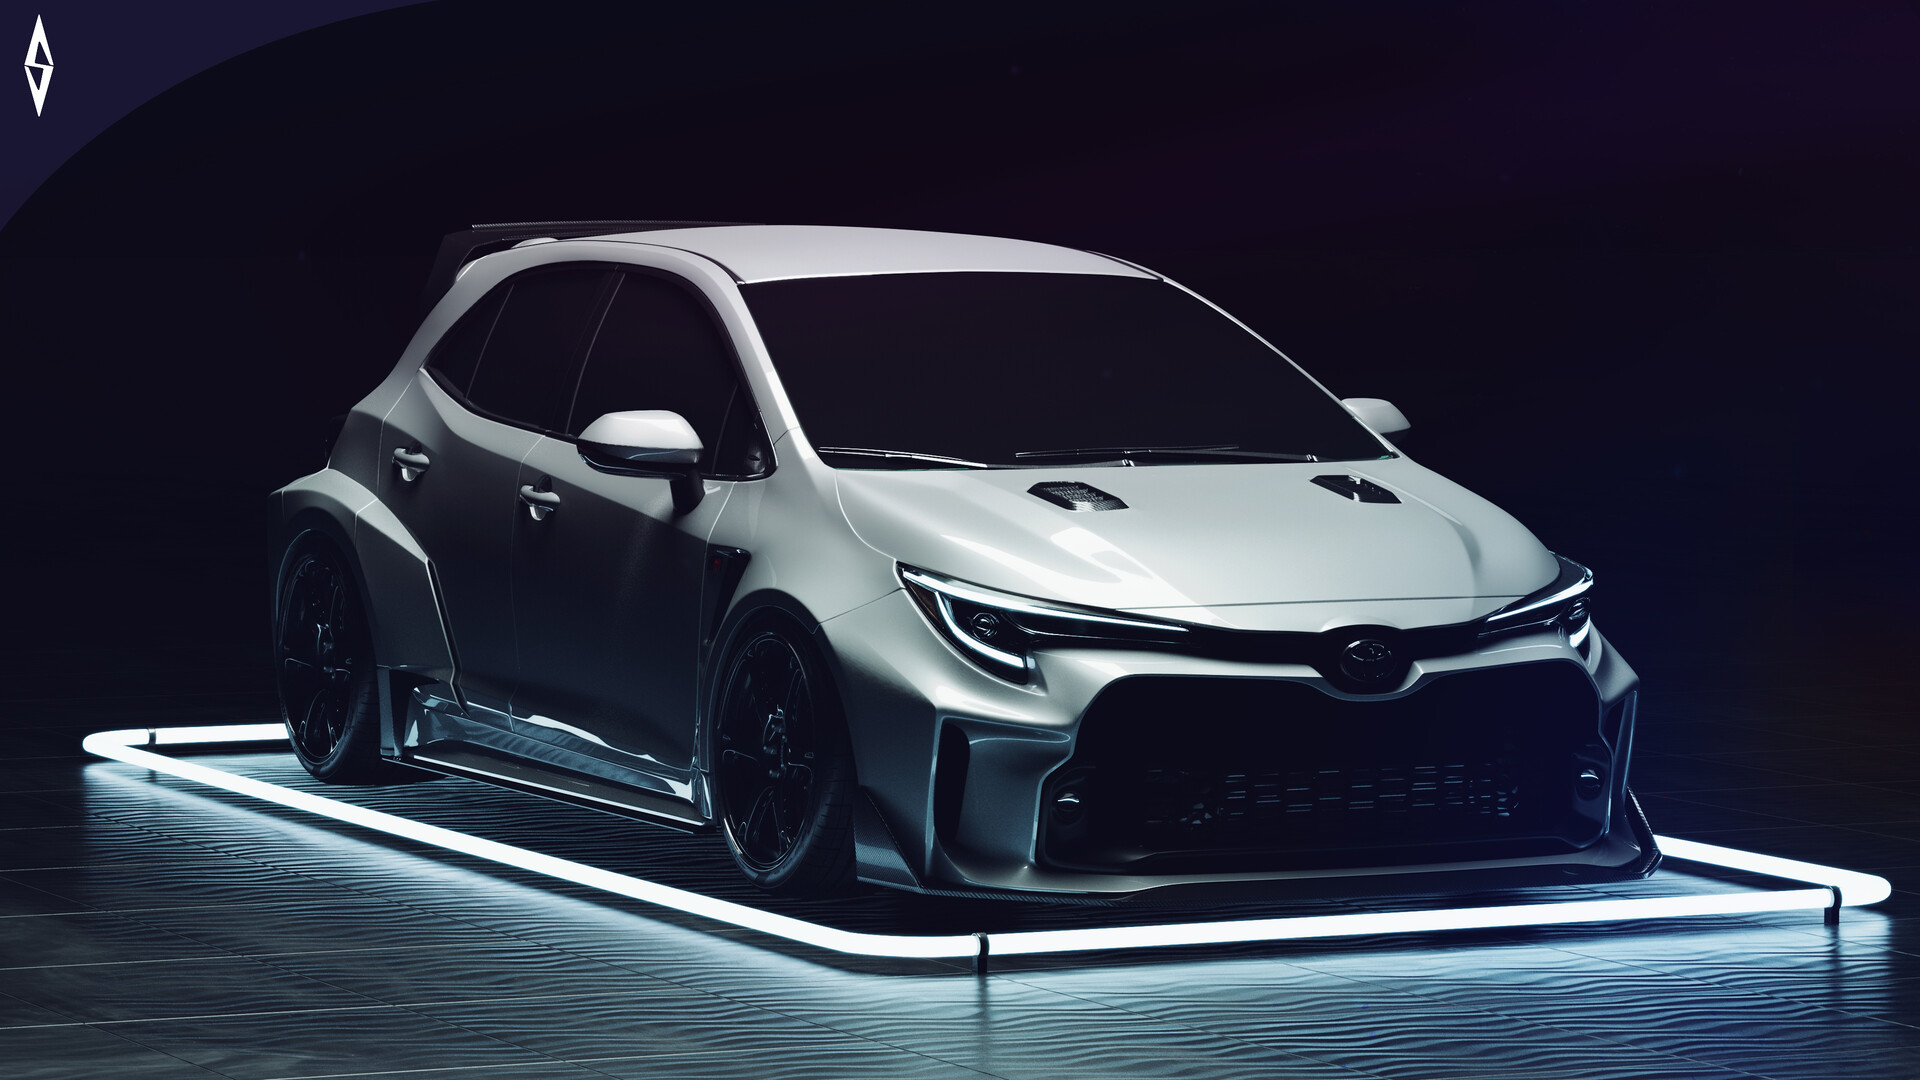 View Photos of the 2023 Toyota GR Corolla Circuit